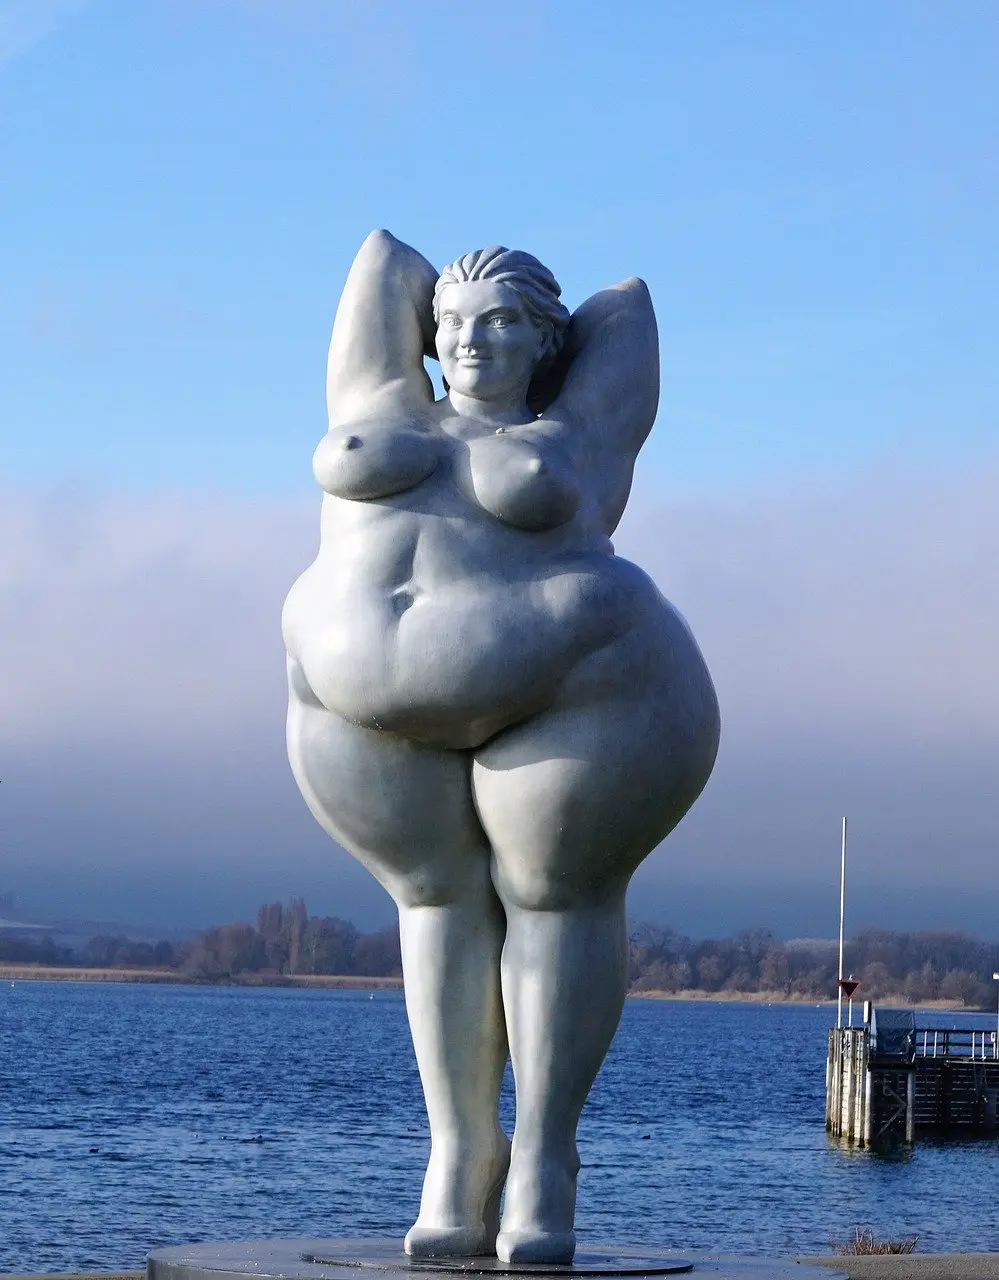 obese women as statue